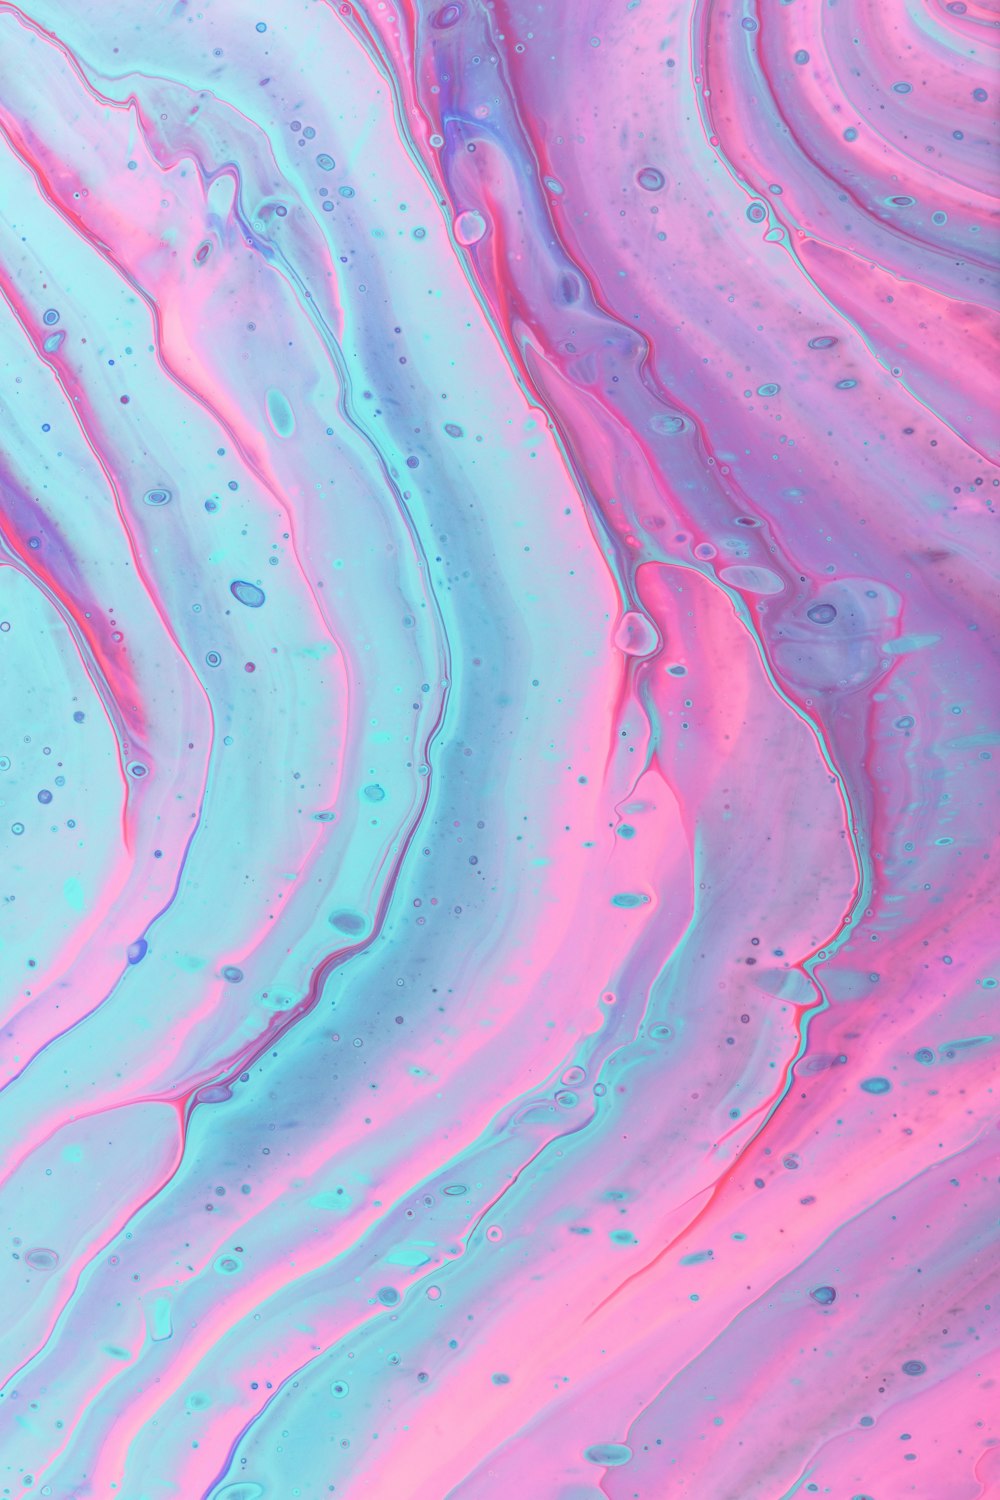 Paint Drip Pictures  Download Free Images on Unsplash